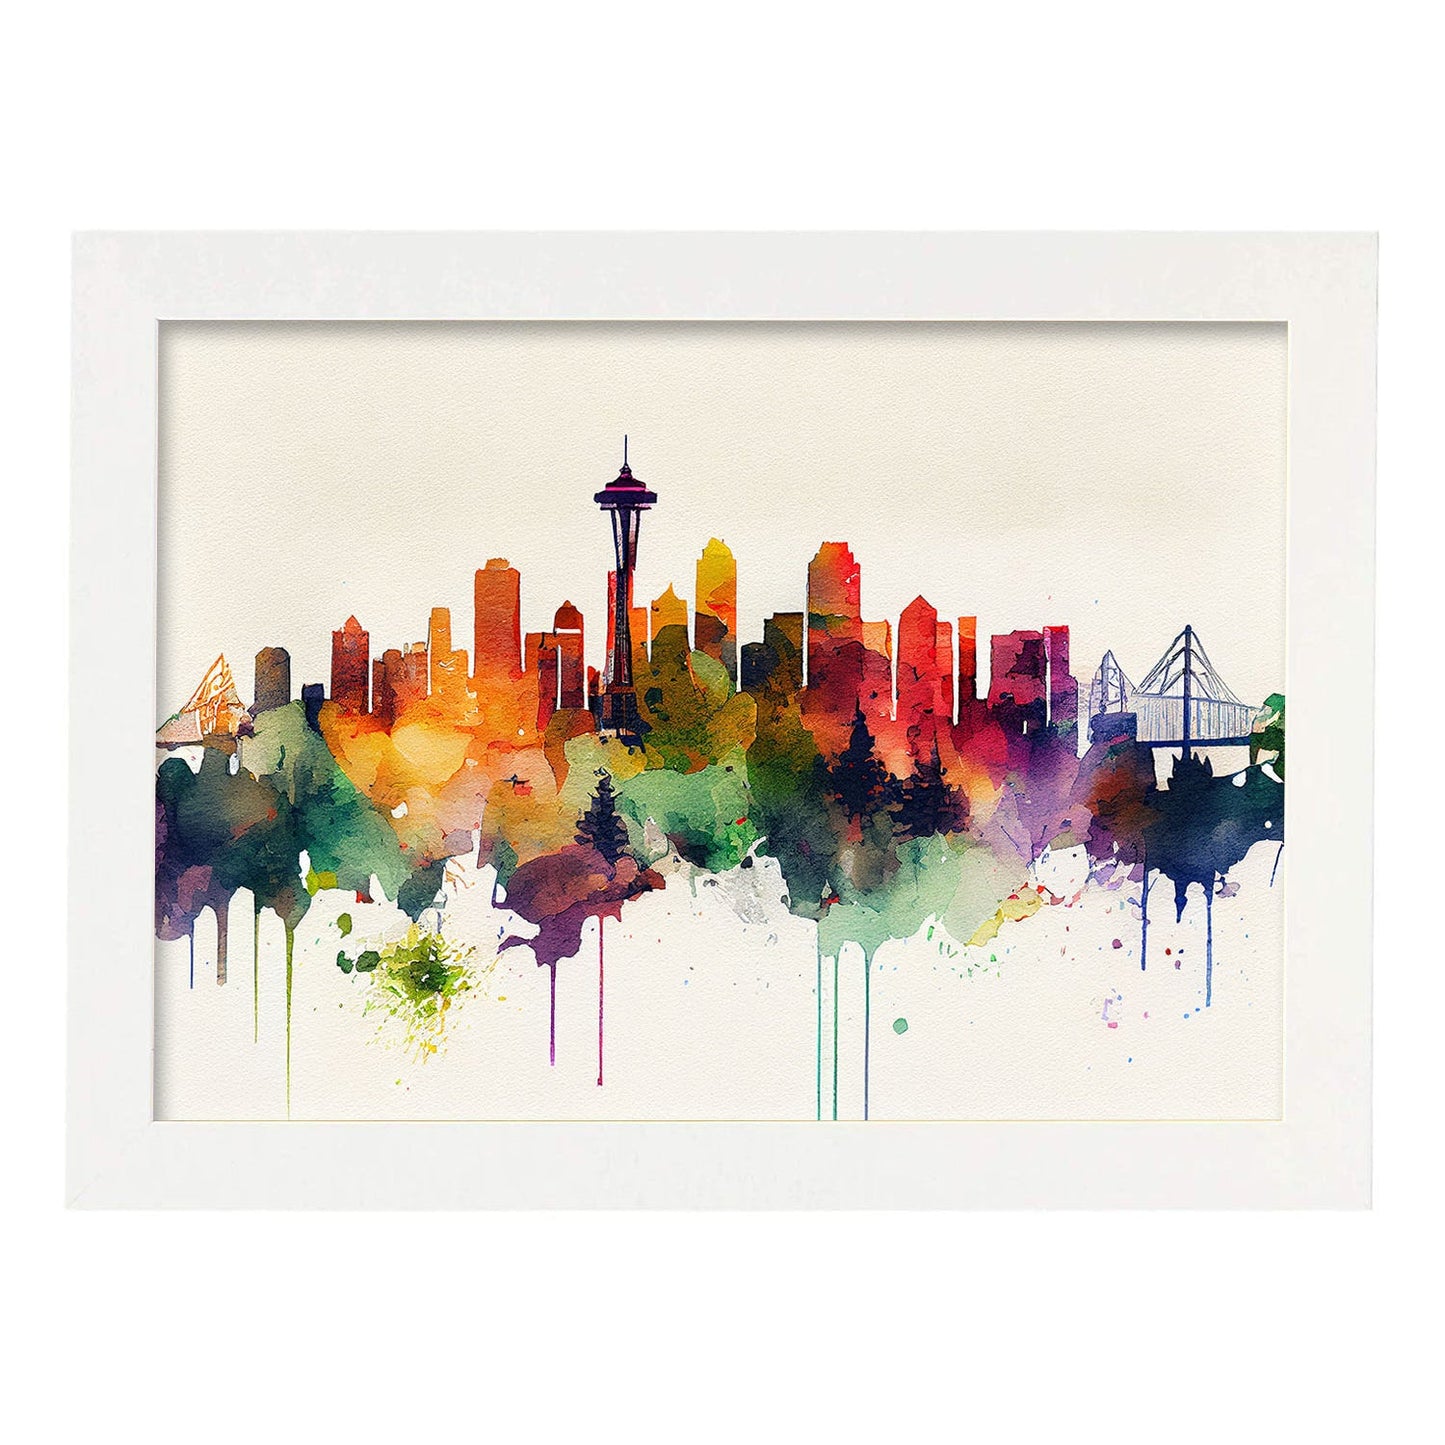 Nacnic watercolor of a skyline of the city of Seattle. Aesthetic Wall Art Prints for Bedroom or Living Room Design.-Artwork-Nacnic-A4-Marco Blanco-Nacnic Estudio SL